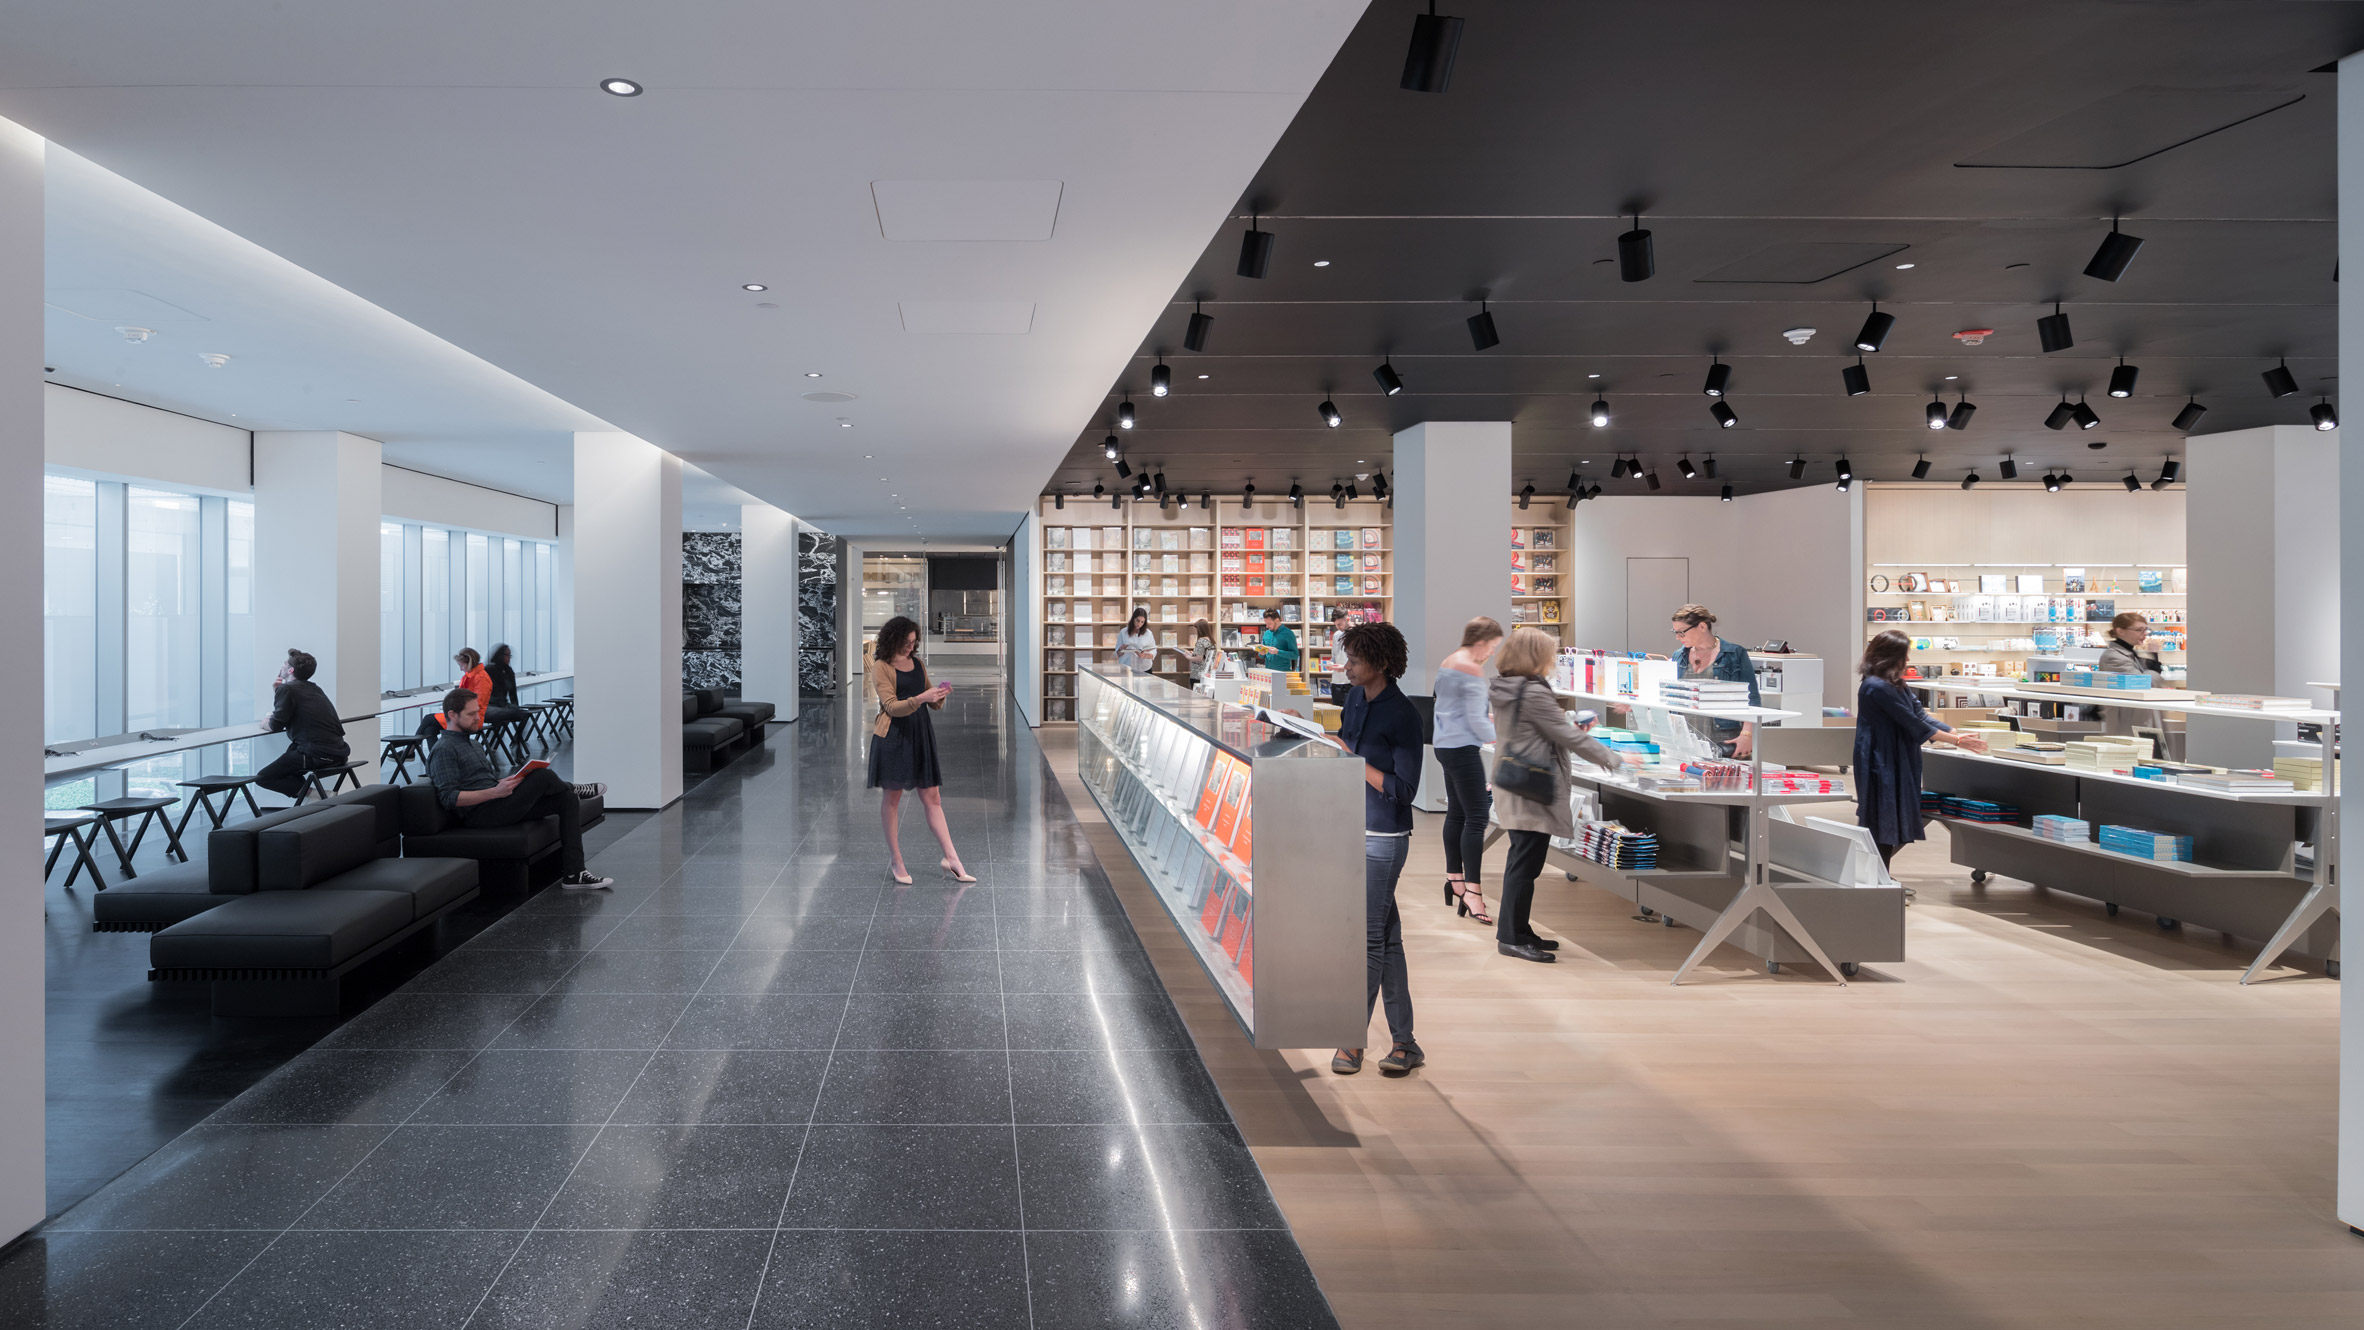 dannelse Portico Unravel MoMA unveils first phase of major overhaul by Diller Scofidio + Renfro